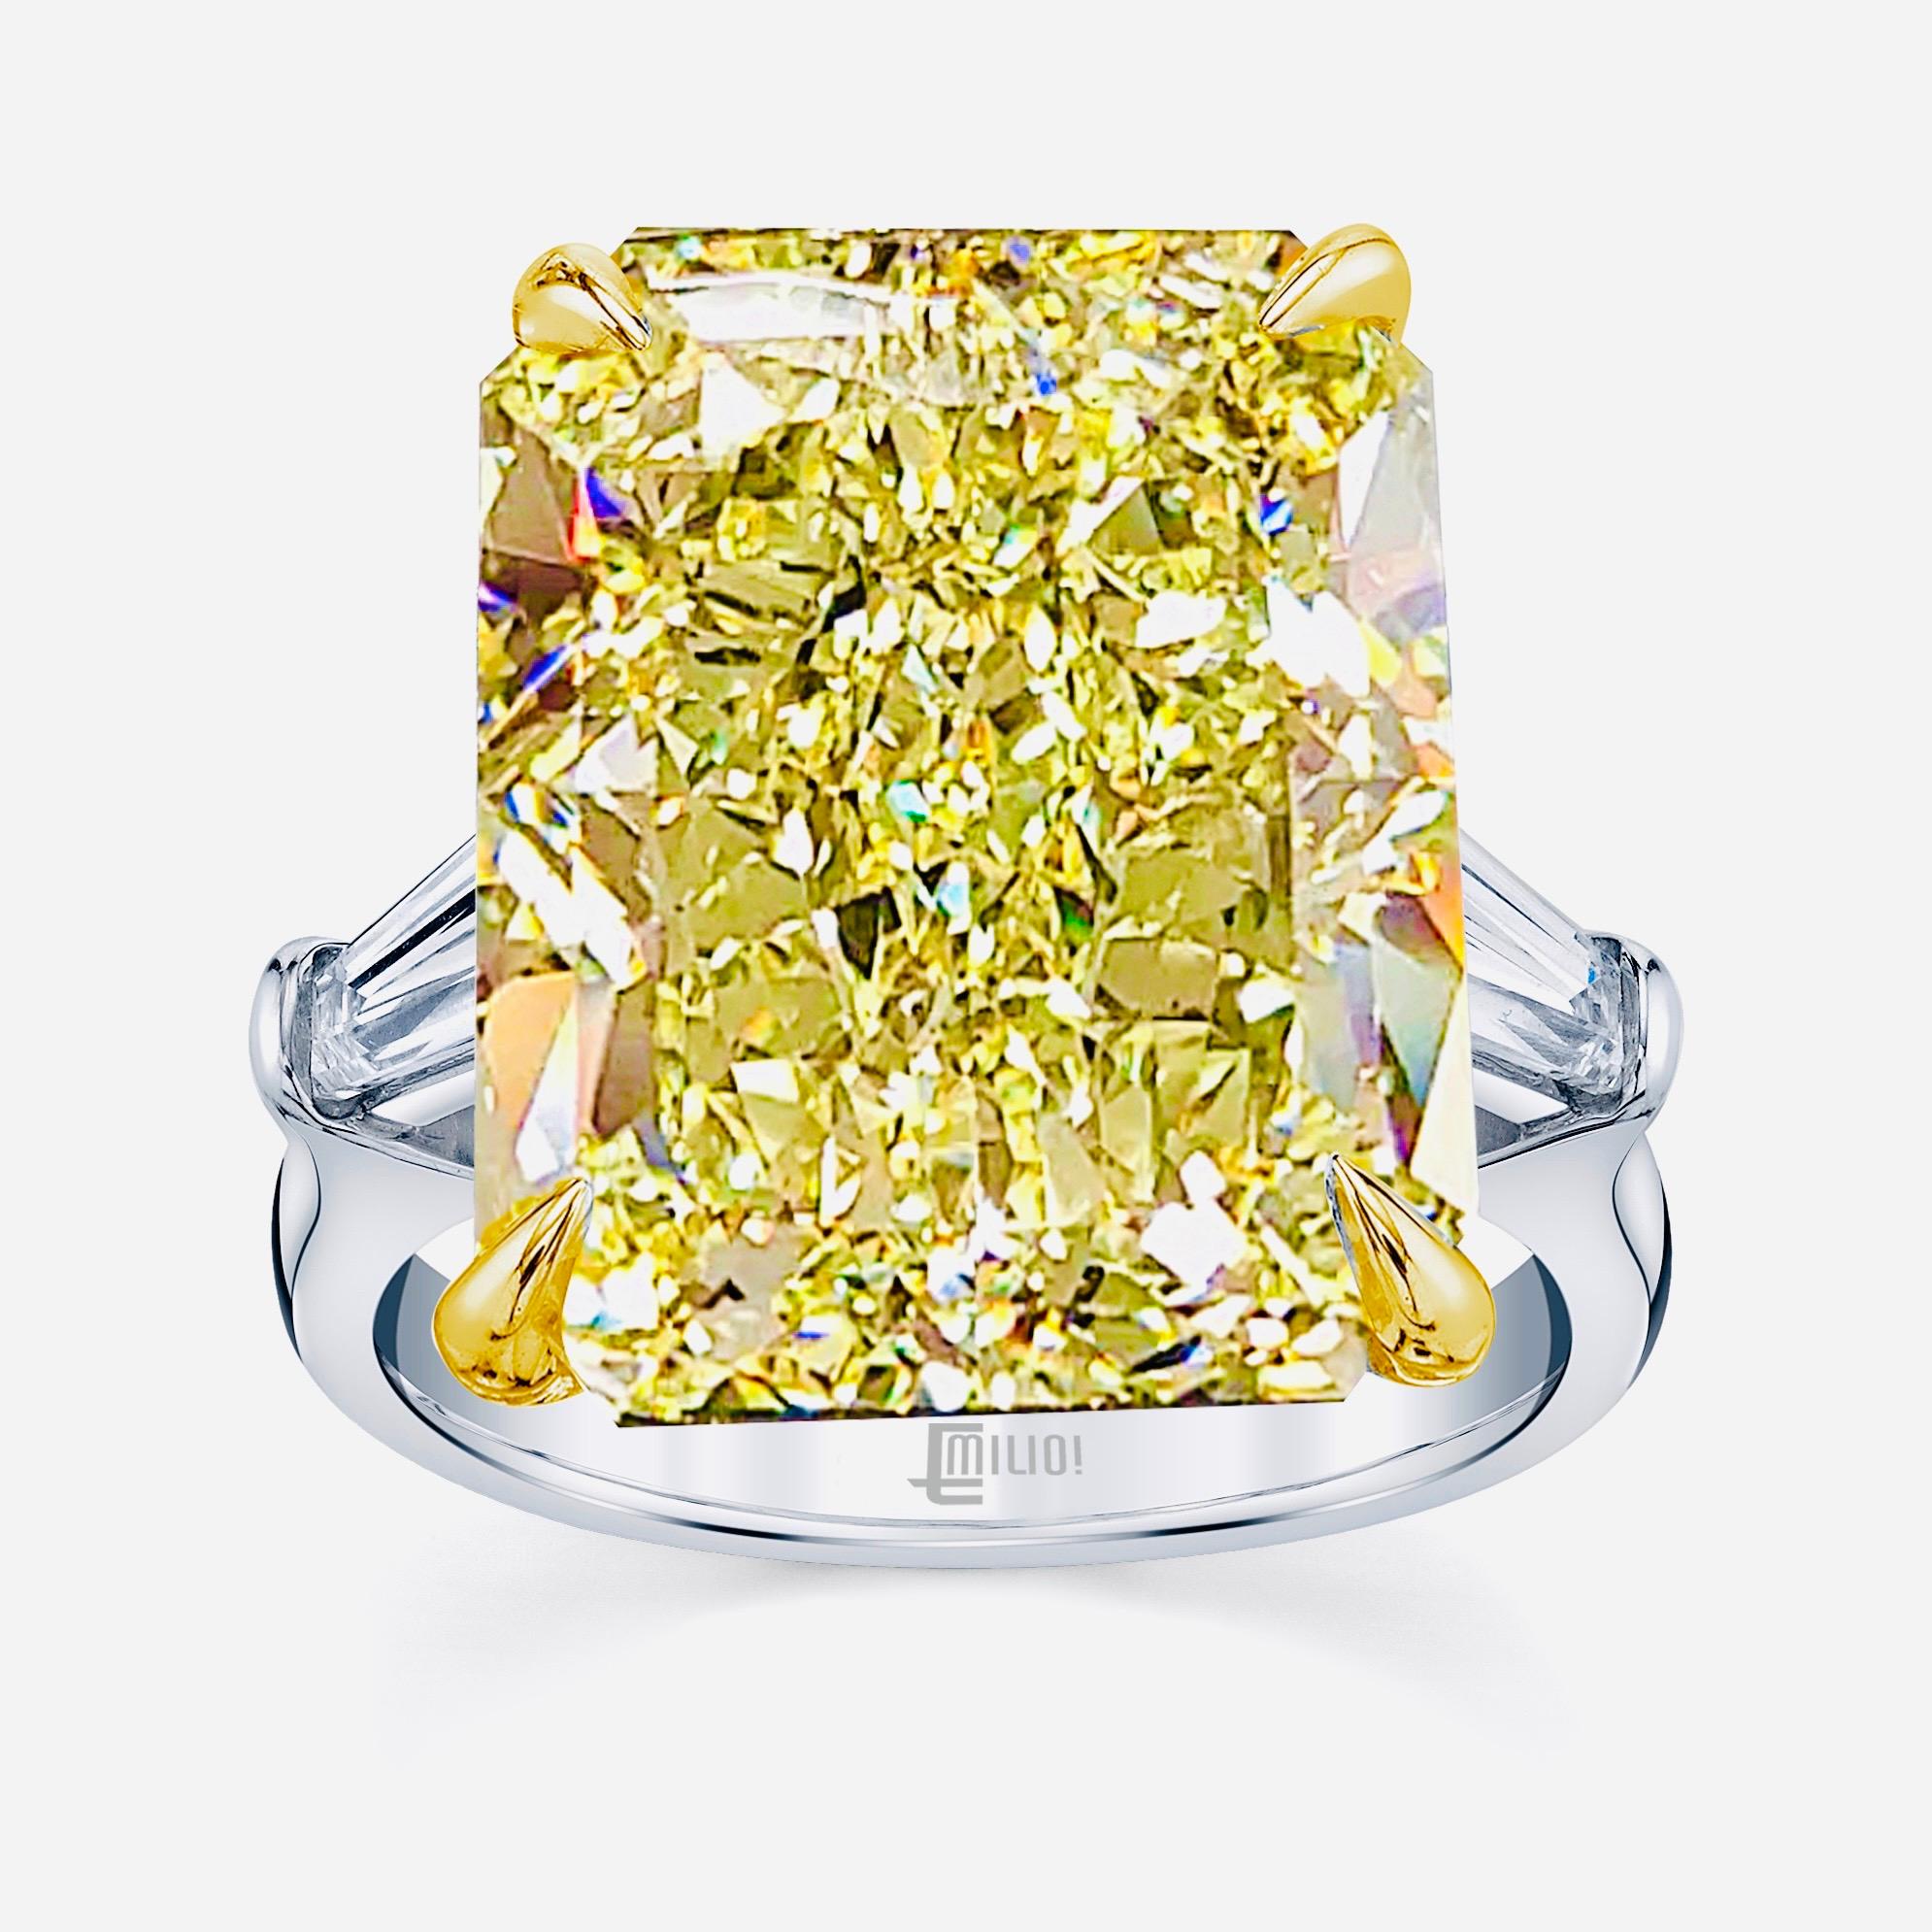 From The Museum Vault At Emilio Jewelry New York,
The most spectacular Intense yellow diamond ring that exists! Filled with tremendous fire, sparkle and dance the center diamond is a dream for whoever will own it. The center is Gia certified as 41